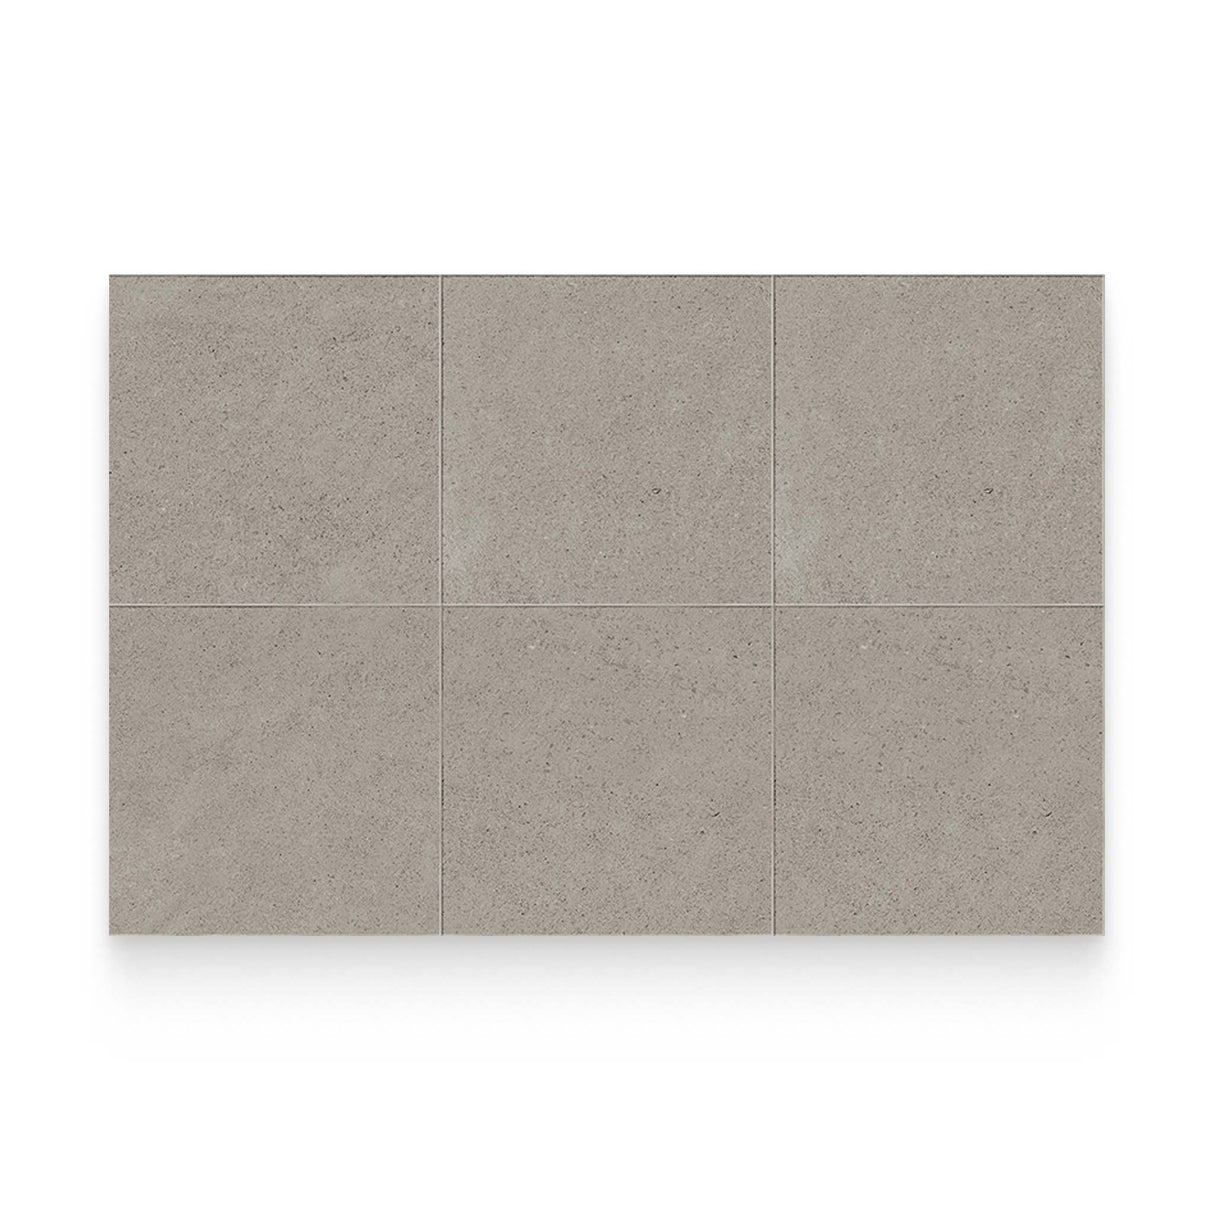 Paver 24x24 Infinity Absolute Matte Square Paver